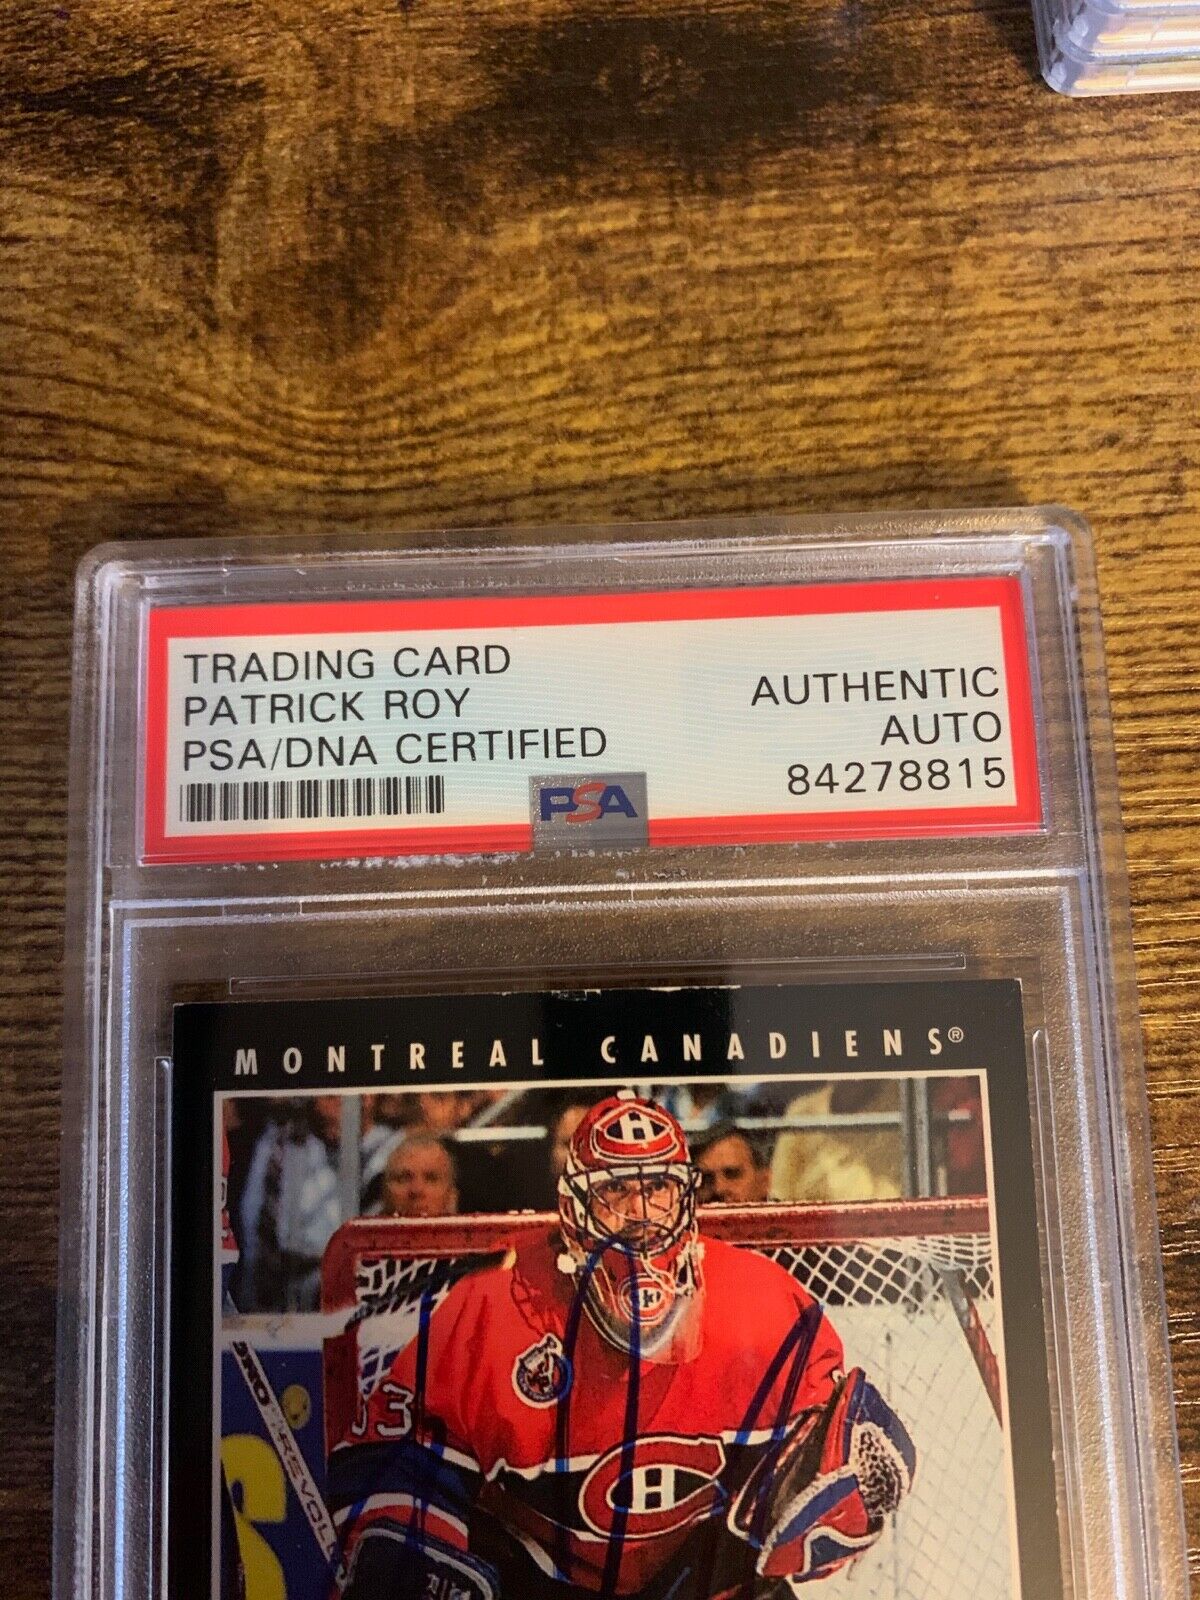 Patrick Roy Autographed Signed 1993/94 Pinnacle NHL Card PSA Certified Slabbed